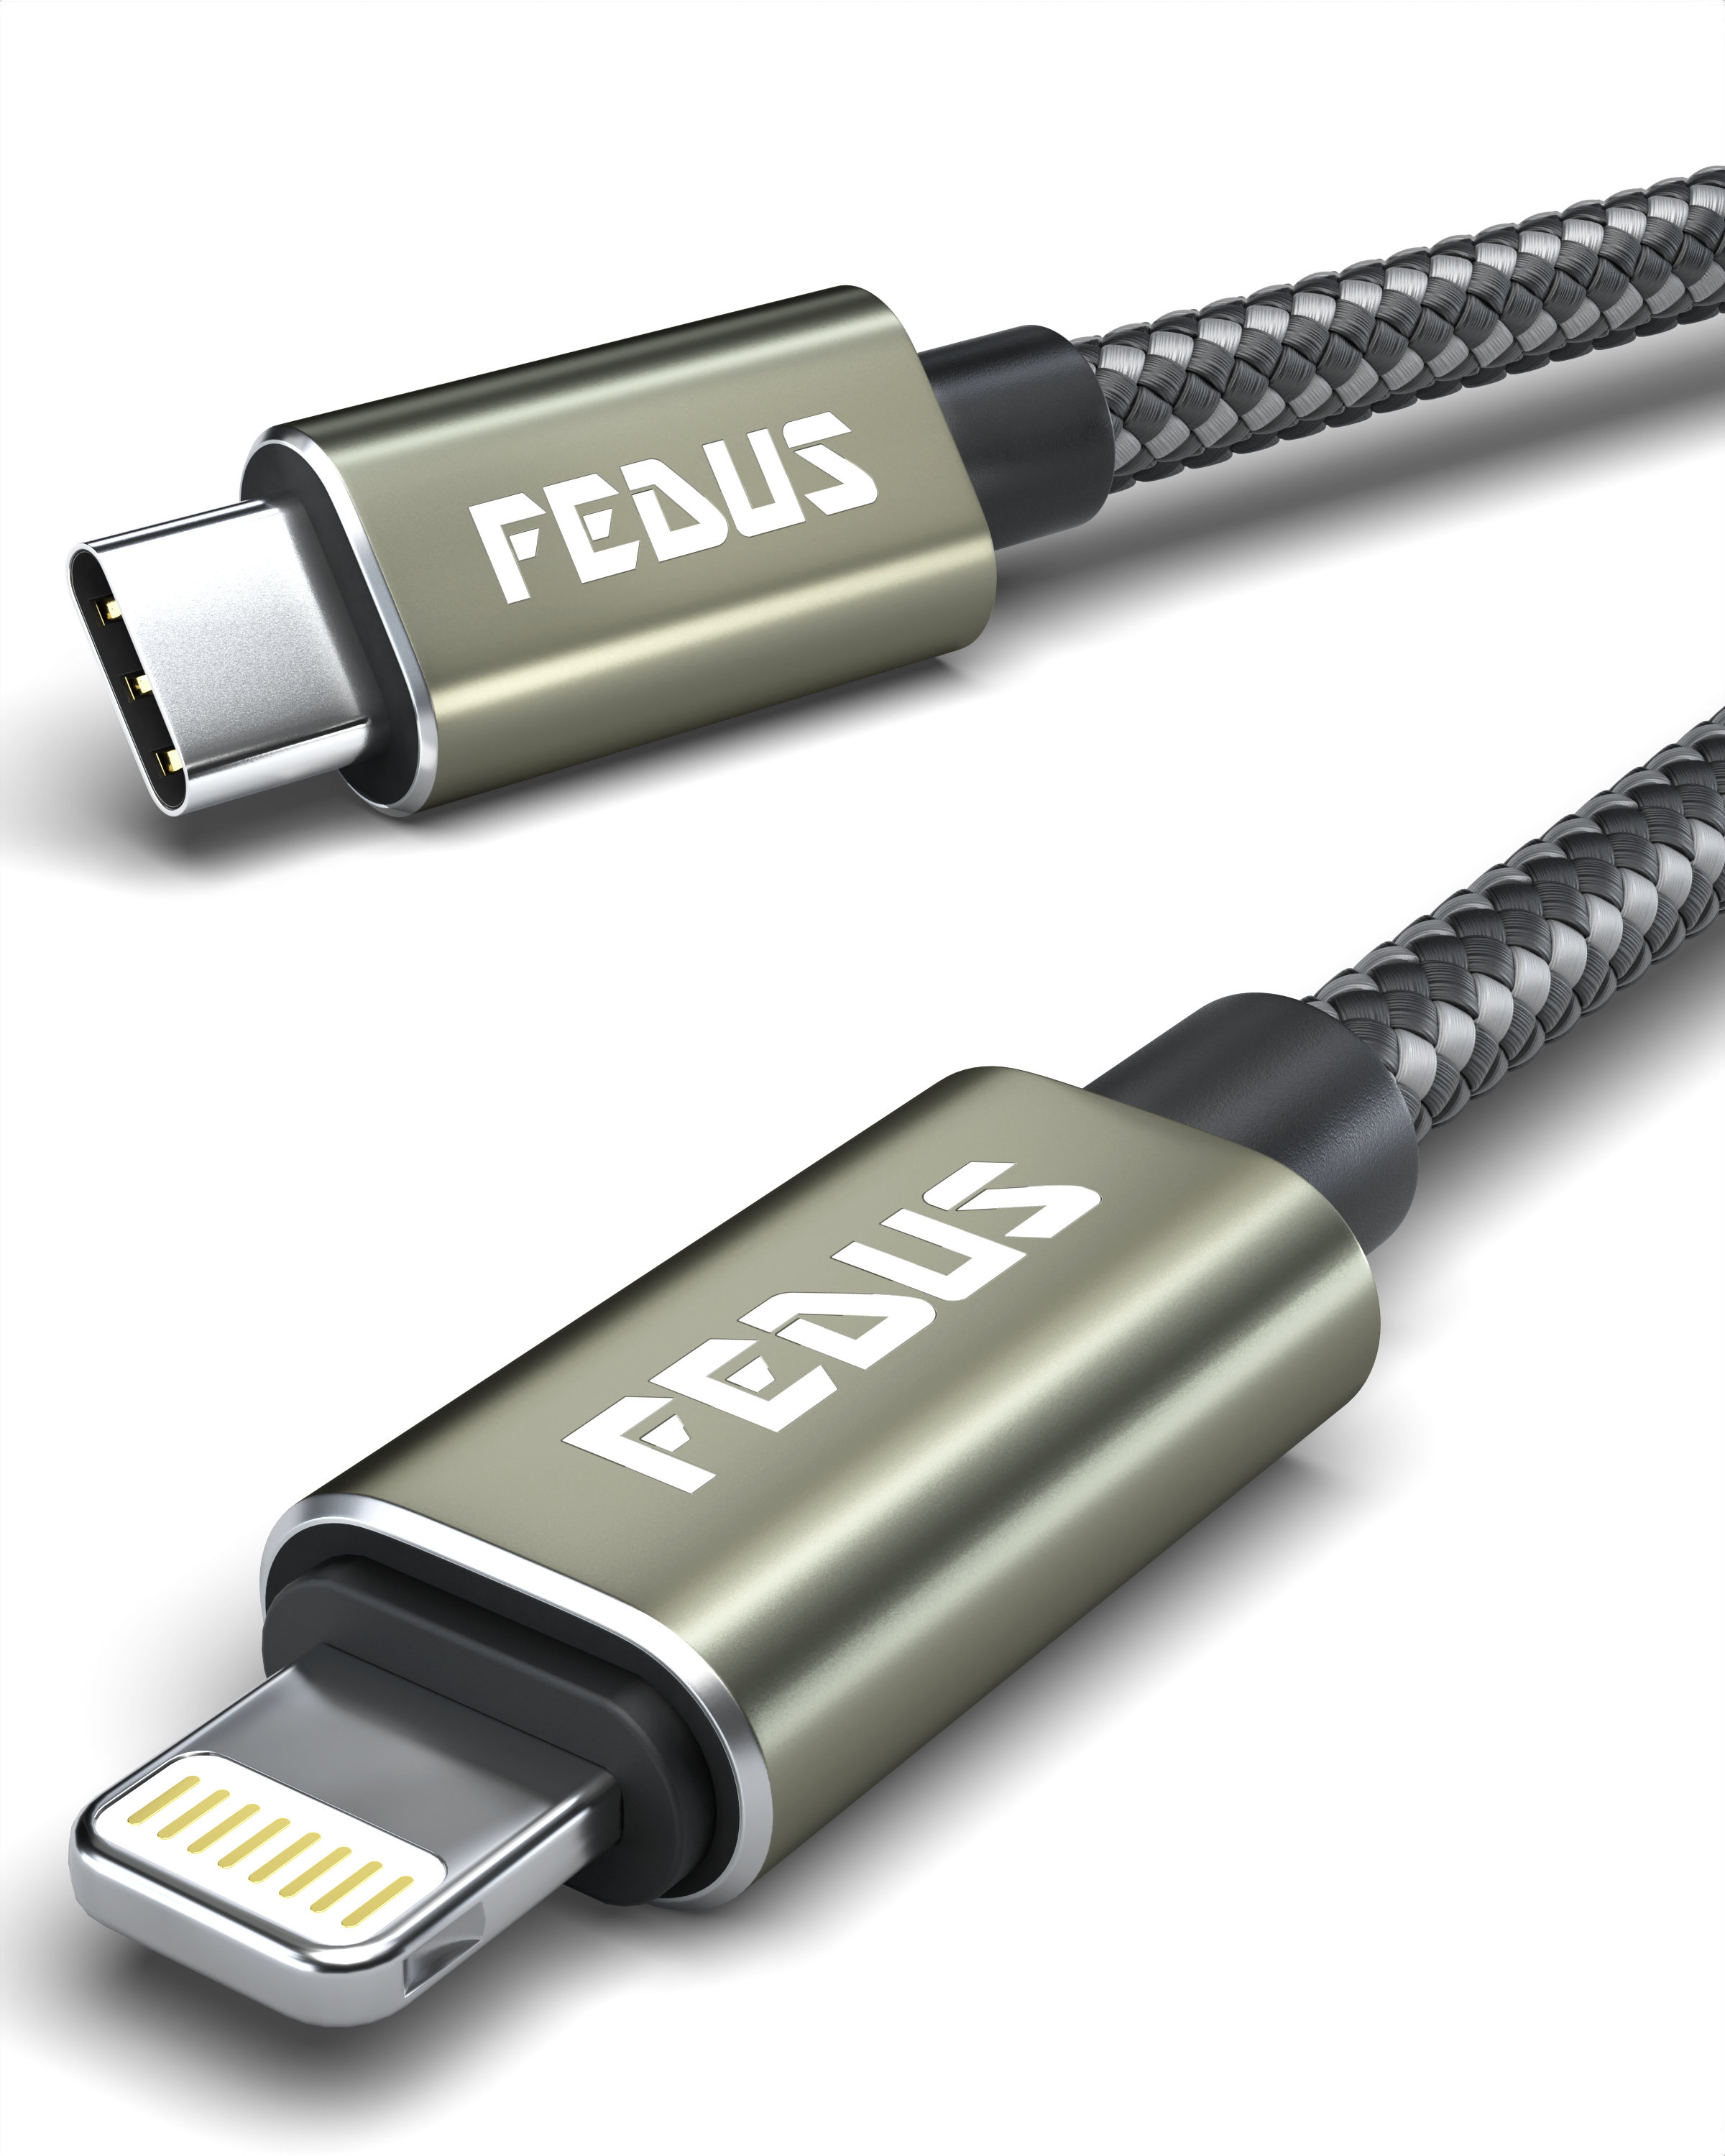             FEDUS USB C To Lightning Cable Fast Quick Charge Support Nylon Braided Sync Charging Cord